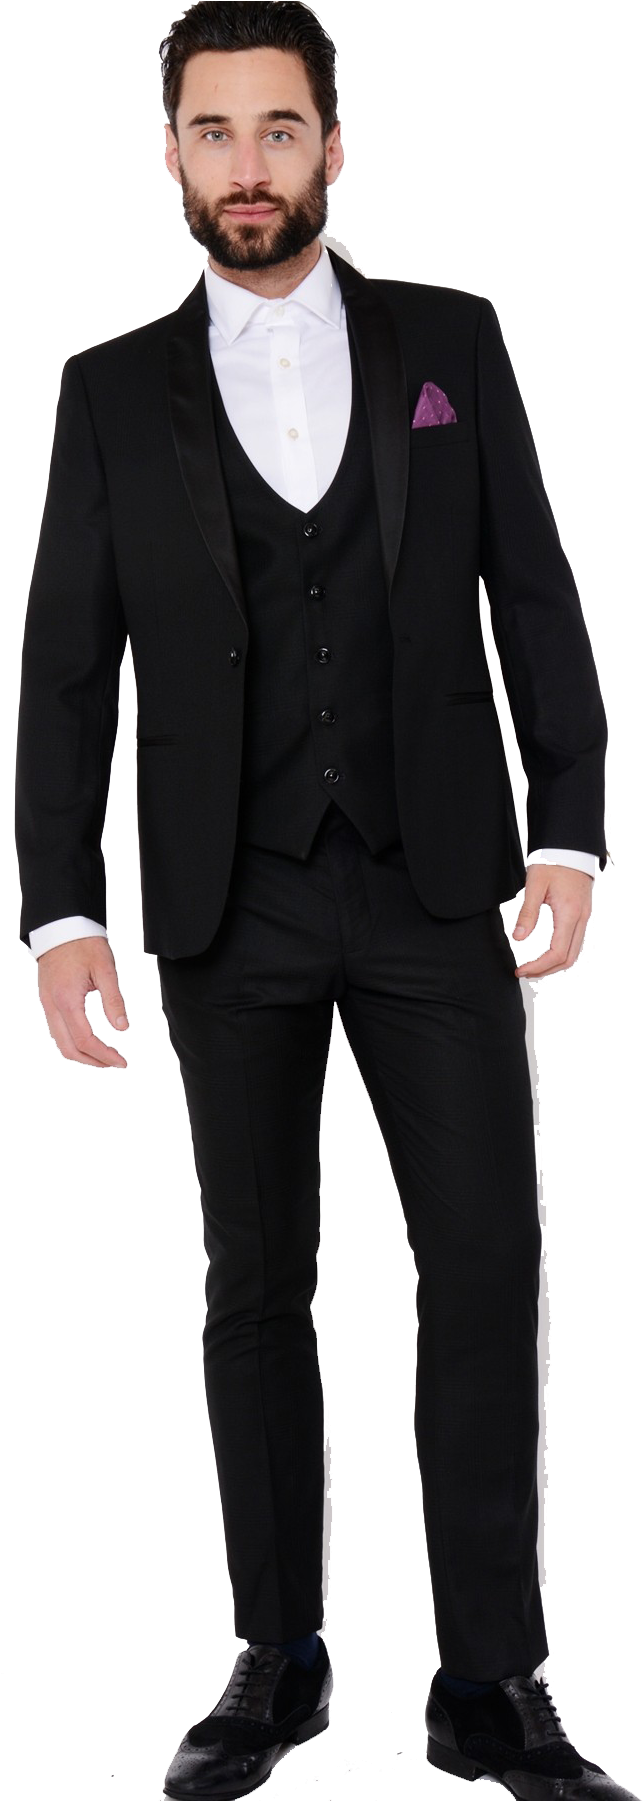 Download Tuxedo Mens 3 Piece Suits PNG Image with No Background ...